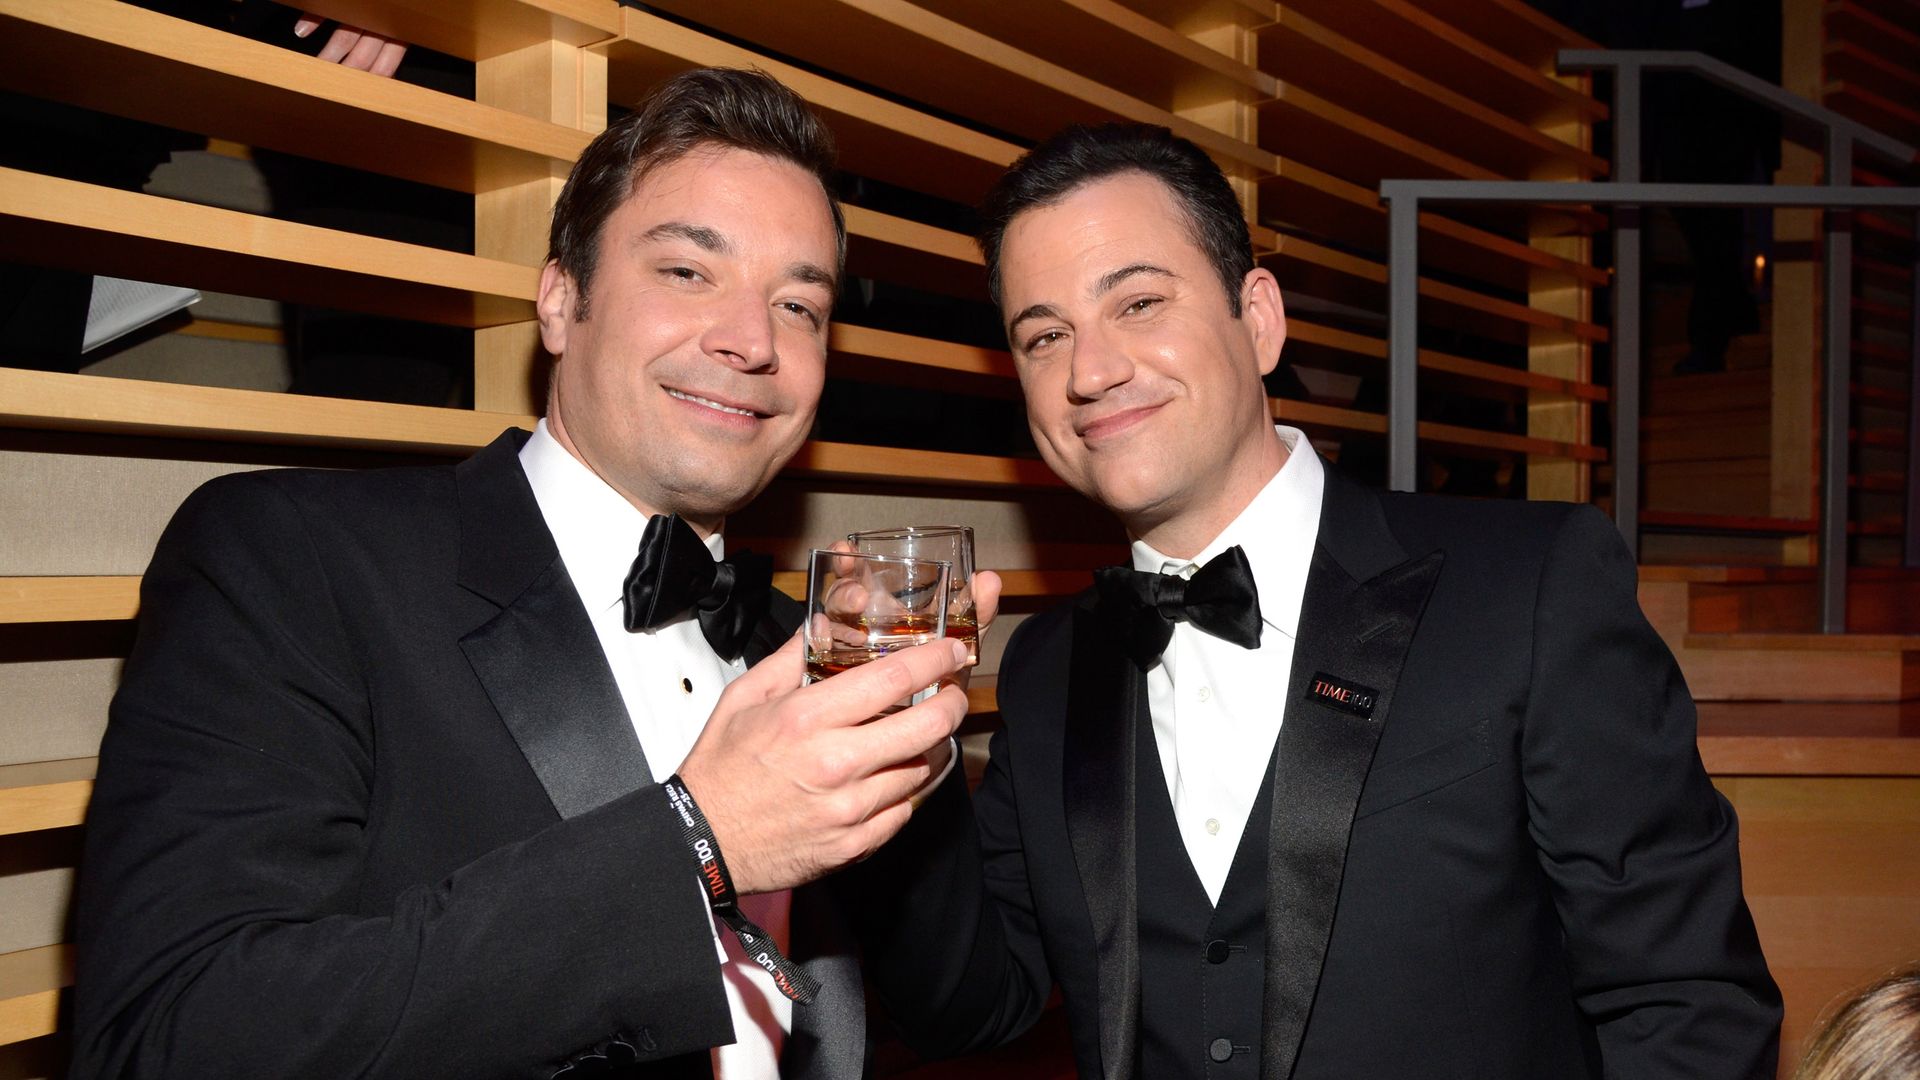 Jimmy Fallon and Jimmy Kimmel attend TIME 100 Gala on April 23, 2013 in New York City